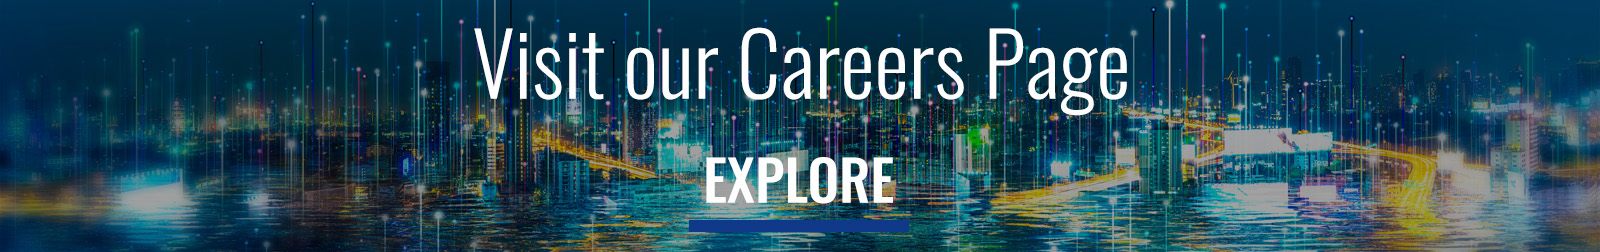 Visit our Careers Page